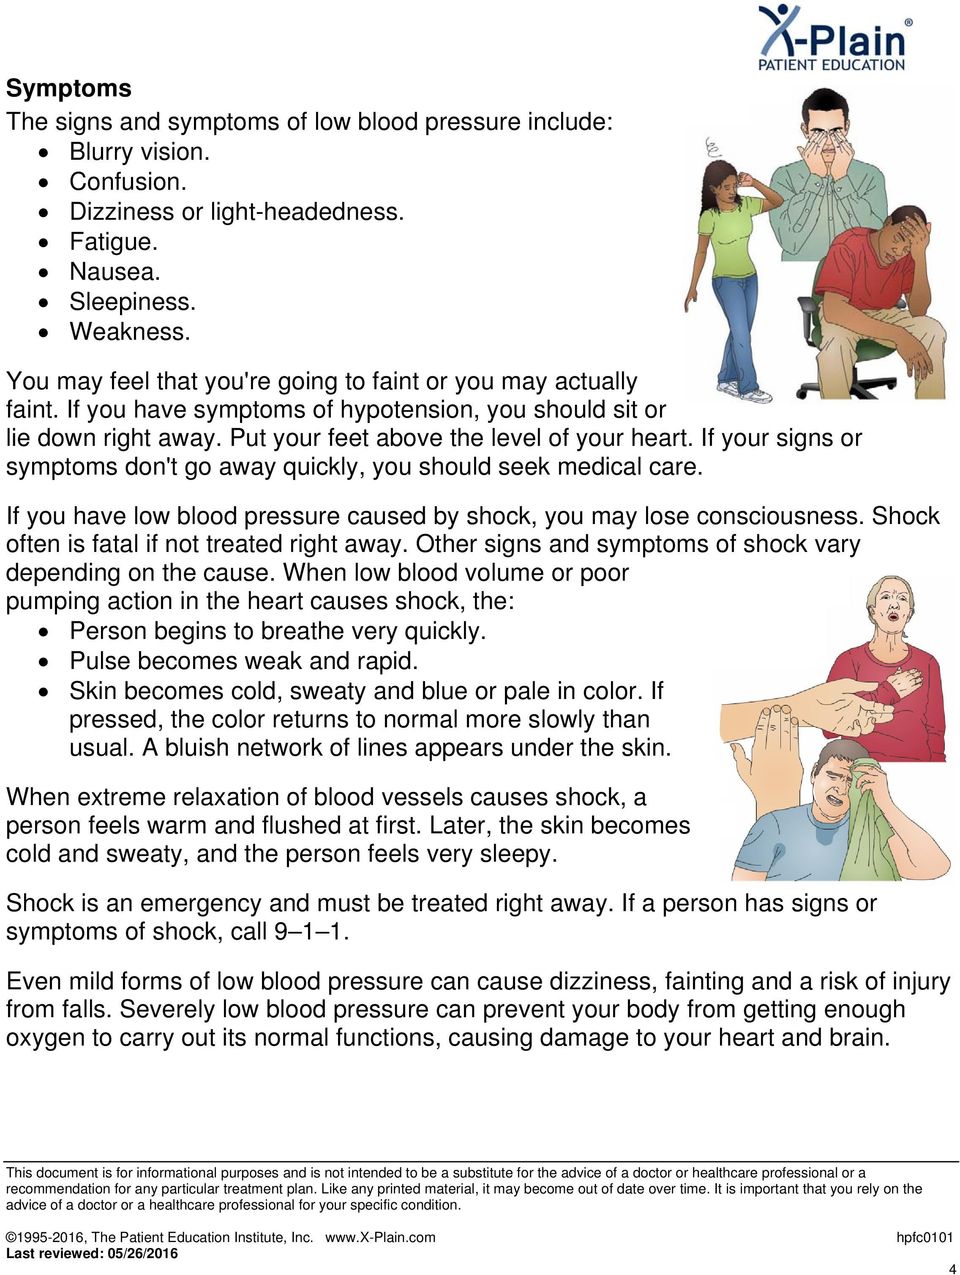 If your signs or symptoms don't go away quickly, you should seek medical care. If you have low blood pressure caused by shock, you may lose consciousness.